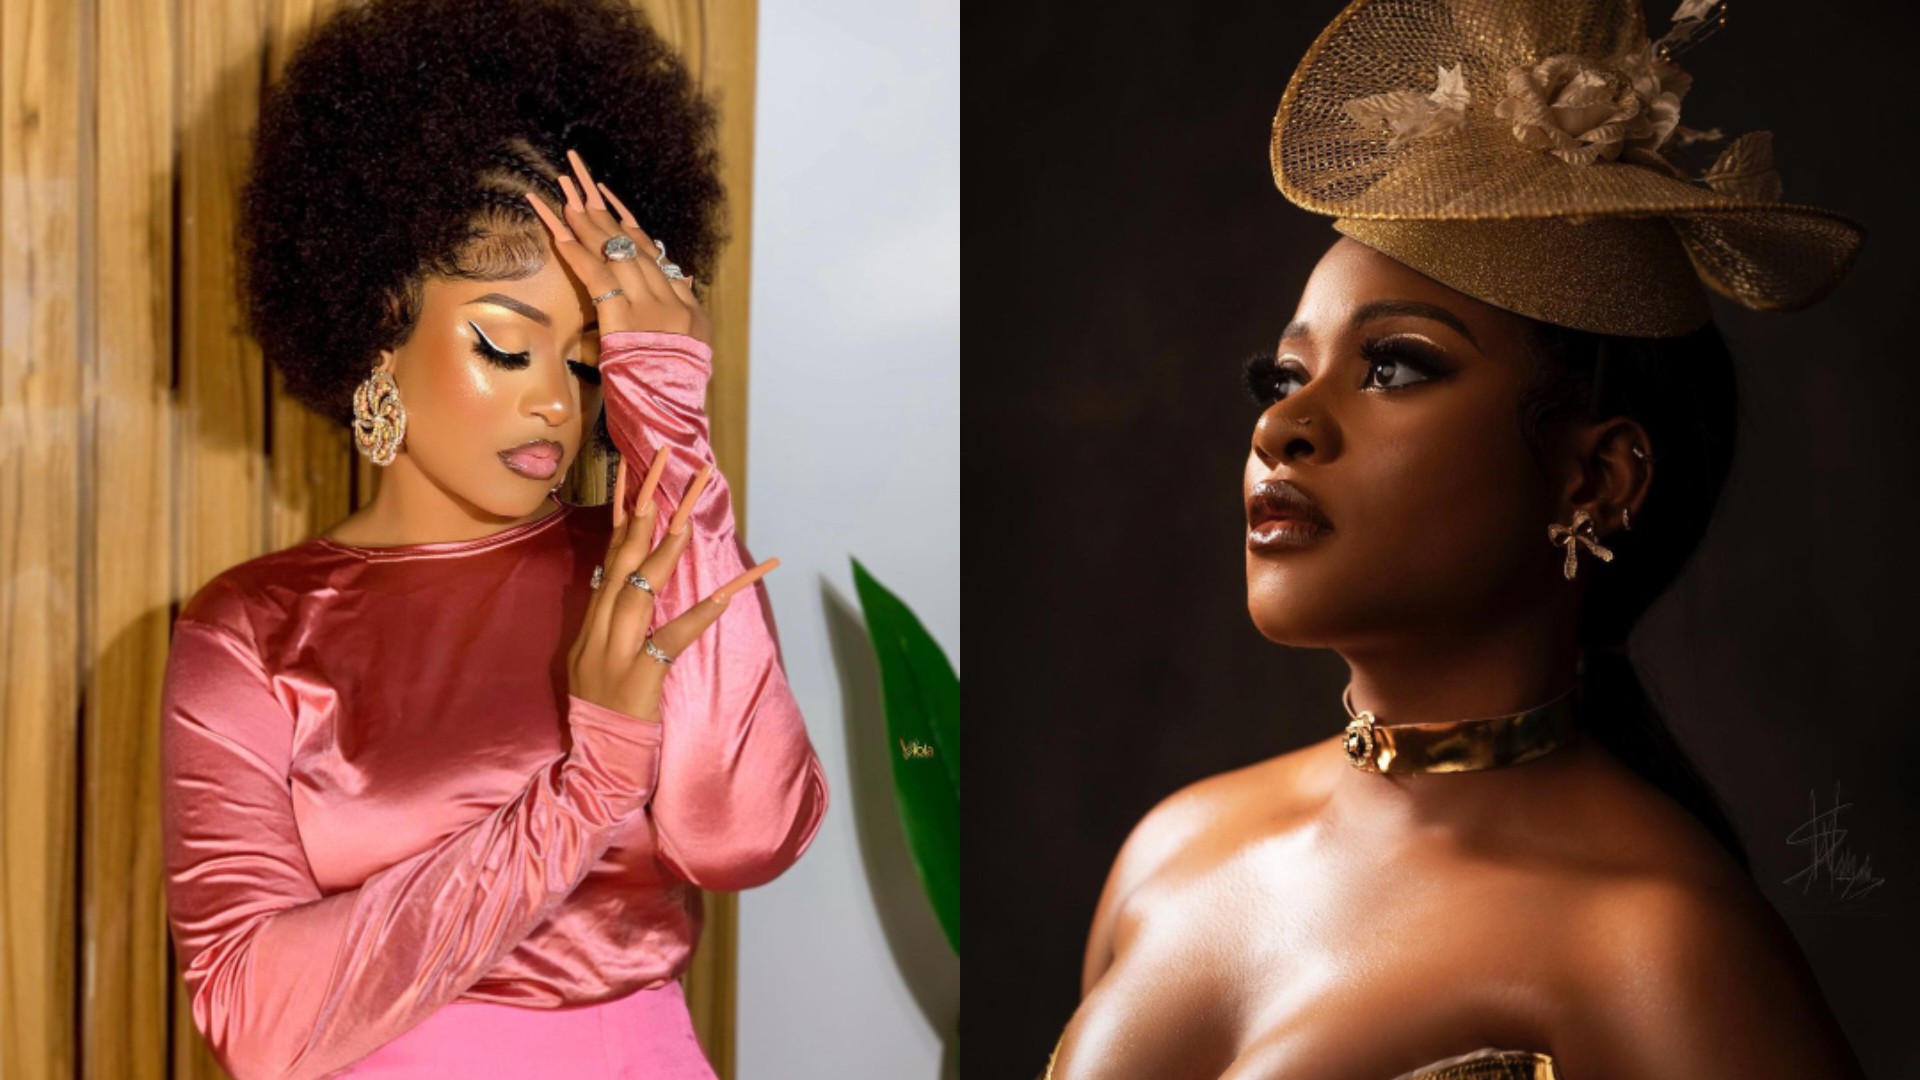 “I’m going through hell, my mental health at stake” – BBNaija’s Phyna cries out